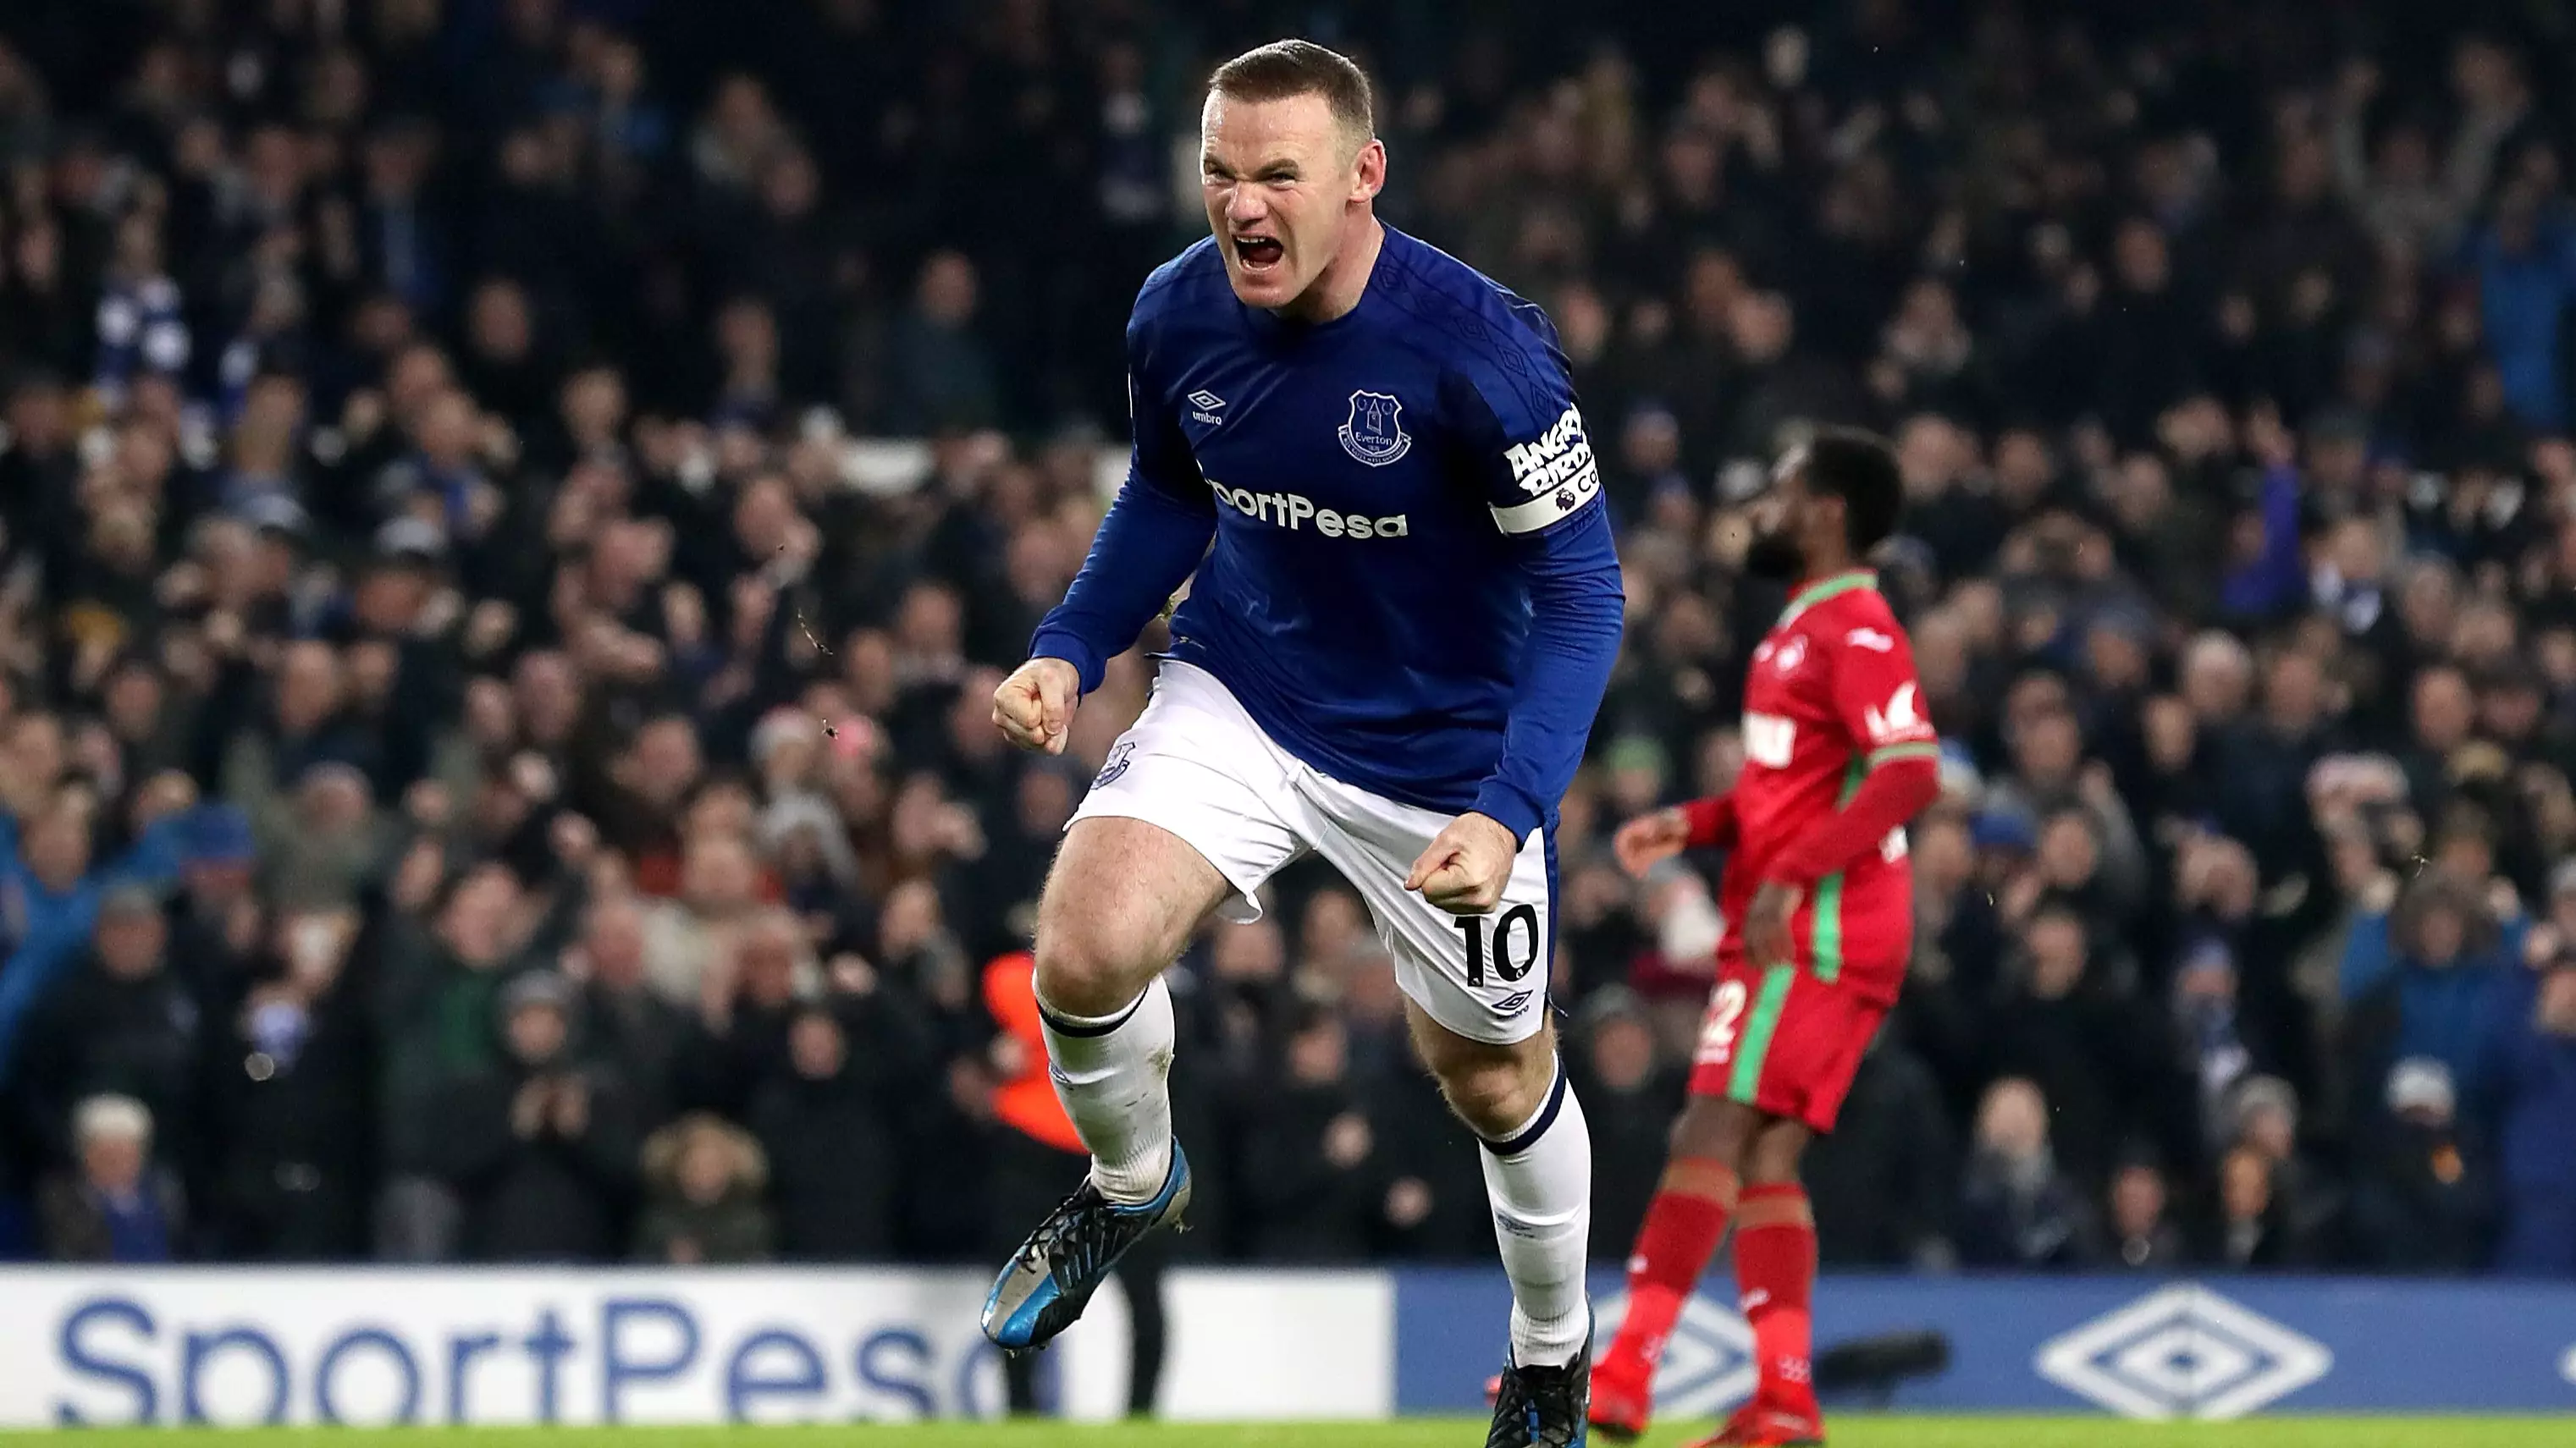 Wayne Rooney Reveals The Three Players He Studied For Midfield Role